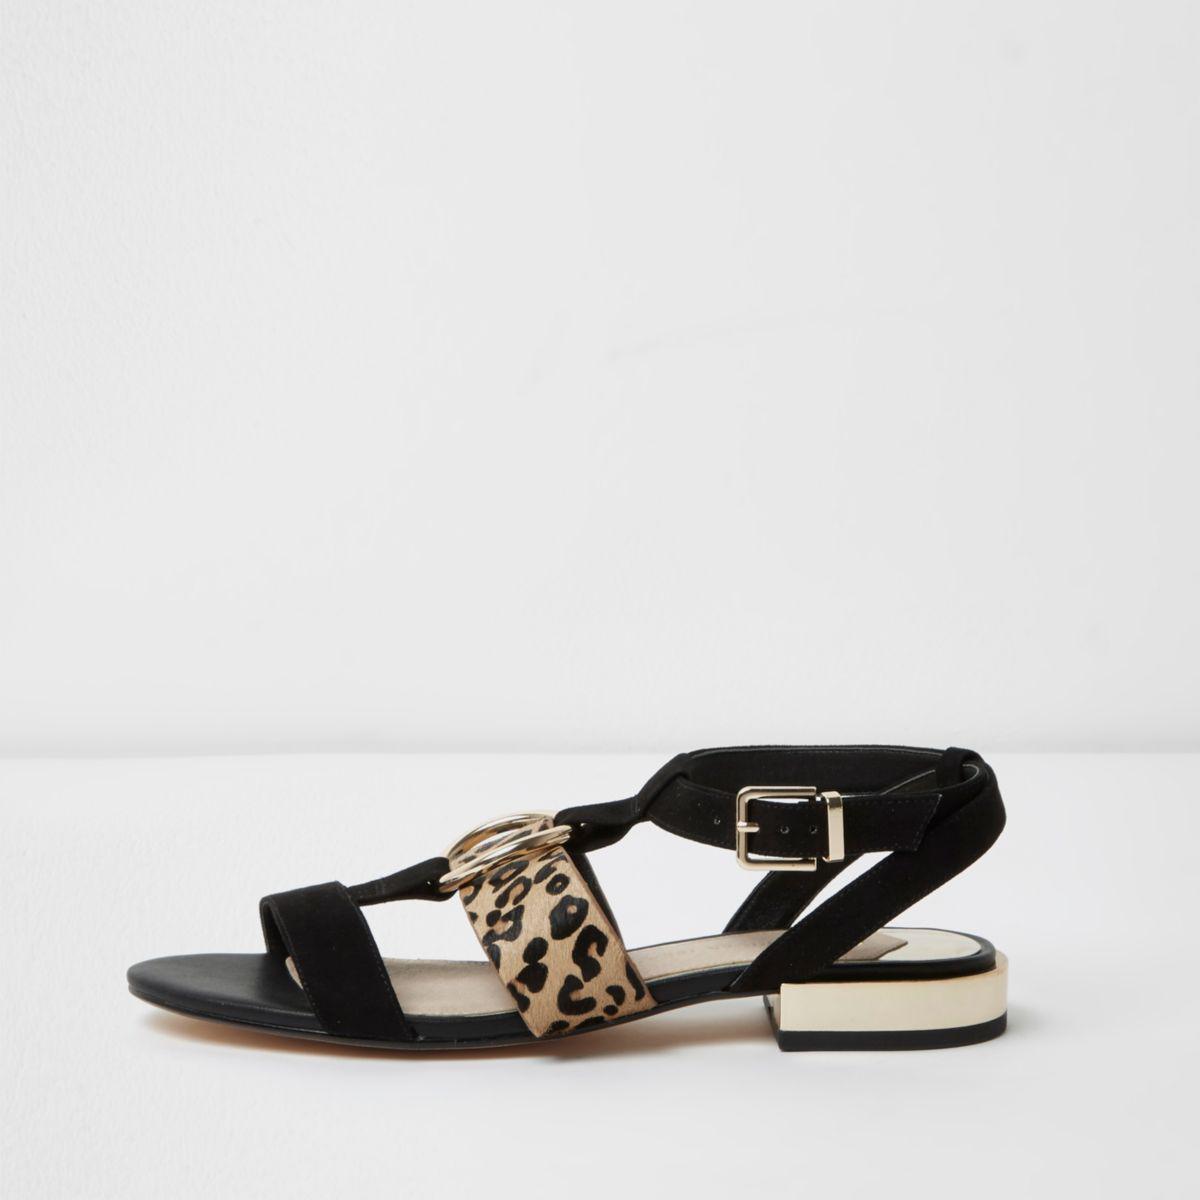 black and leopard sandals